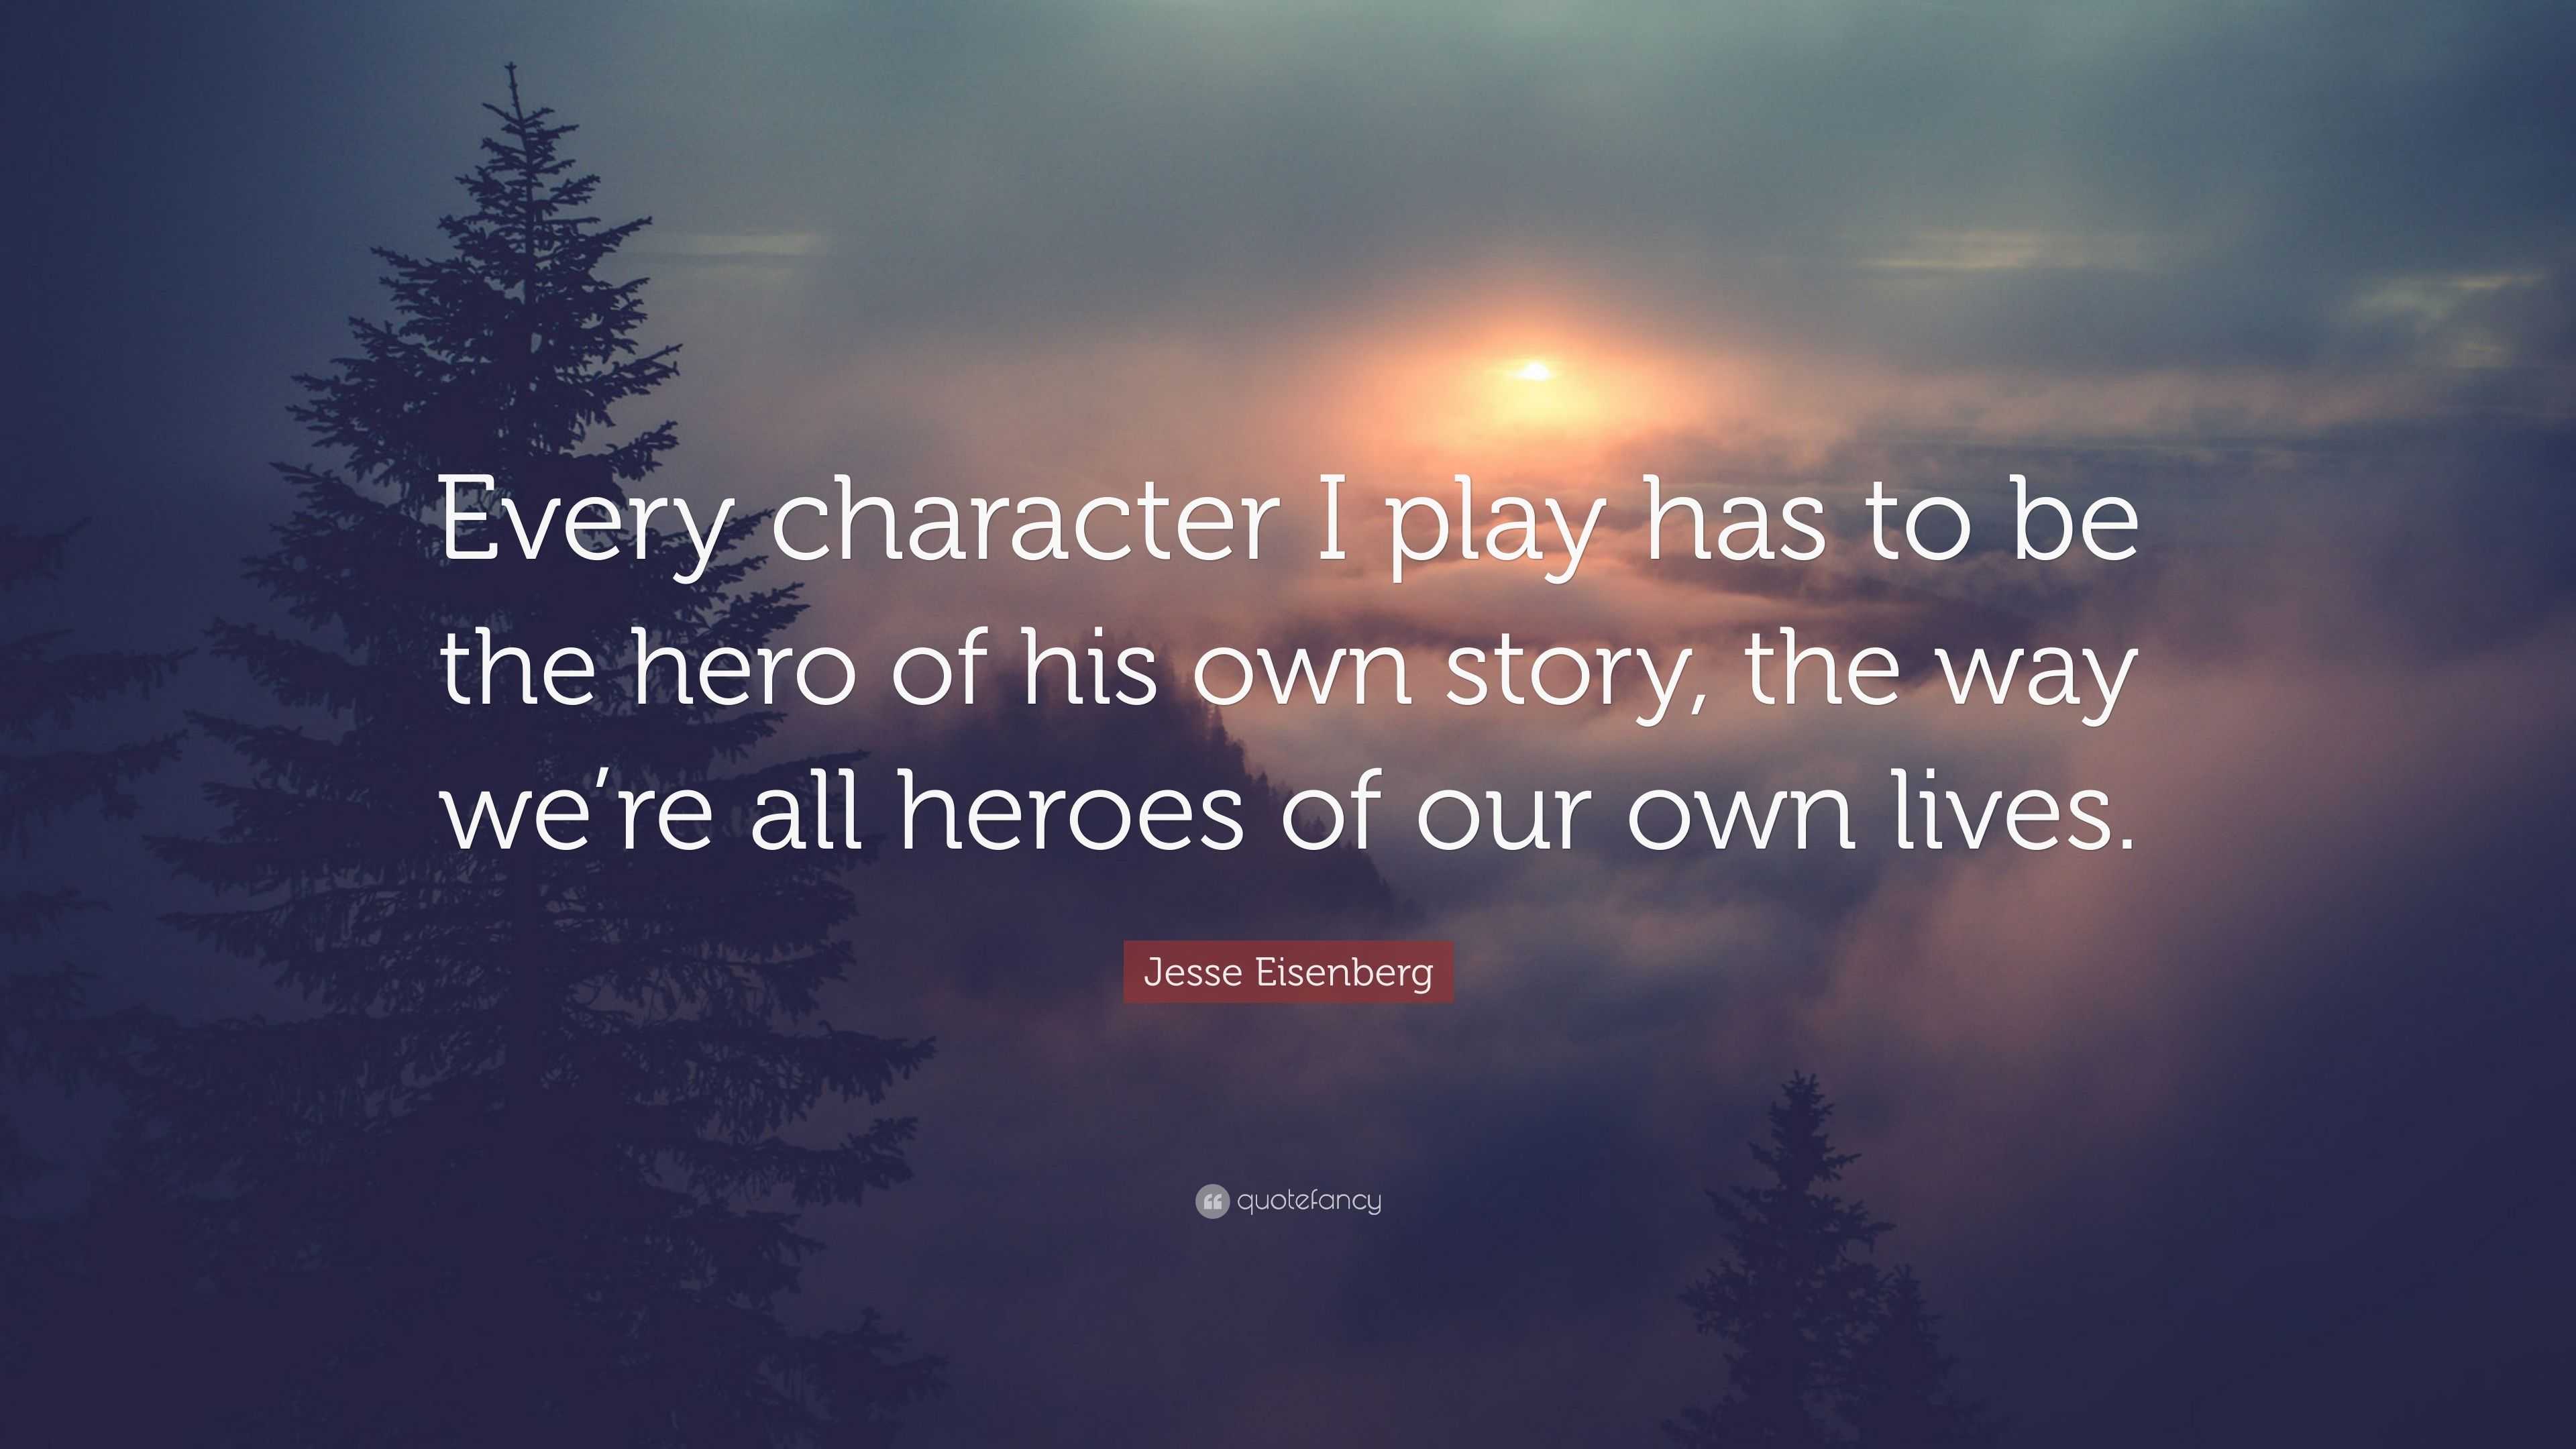 Jesse Eisenberg Quote: “Every character I play has to be the hero of ...